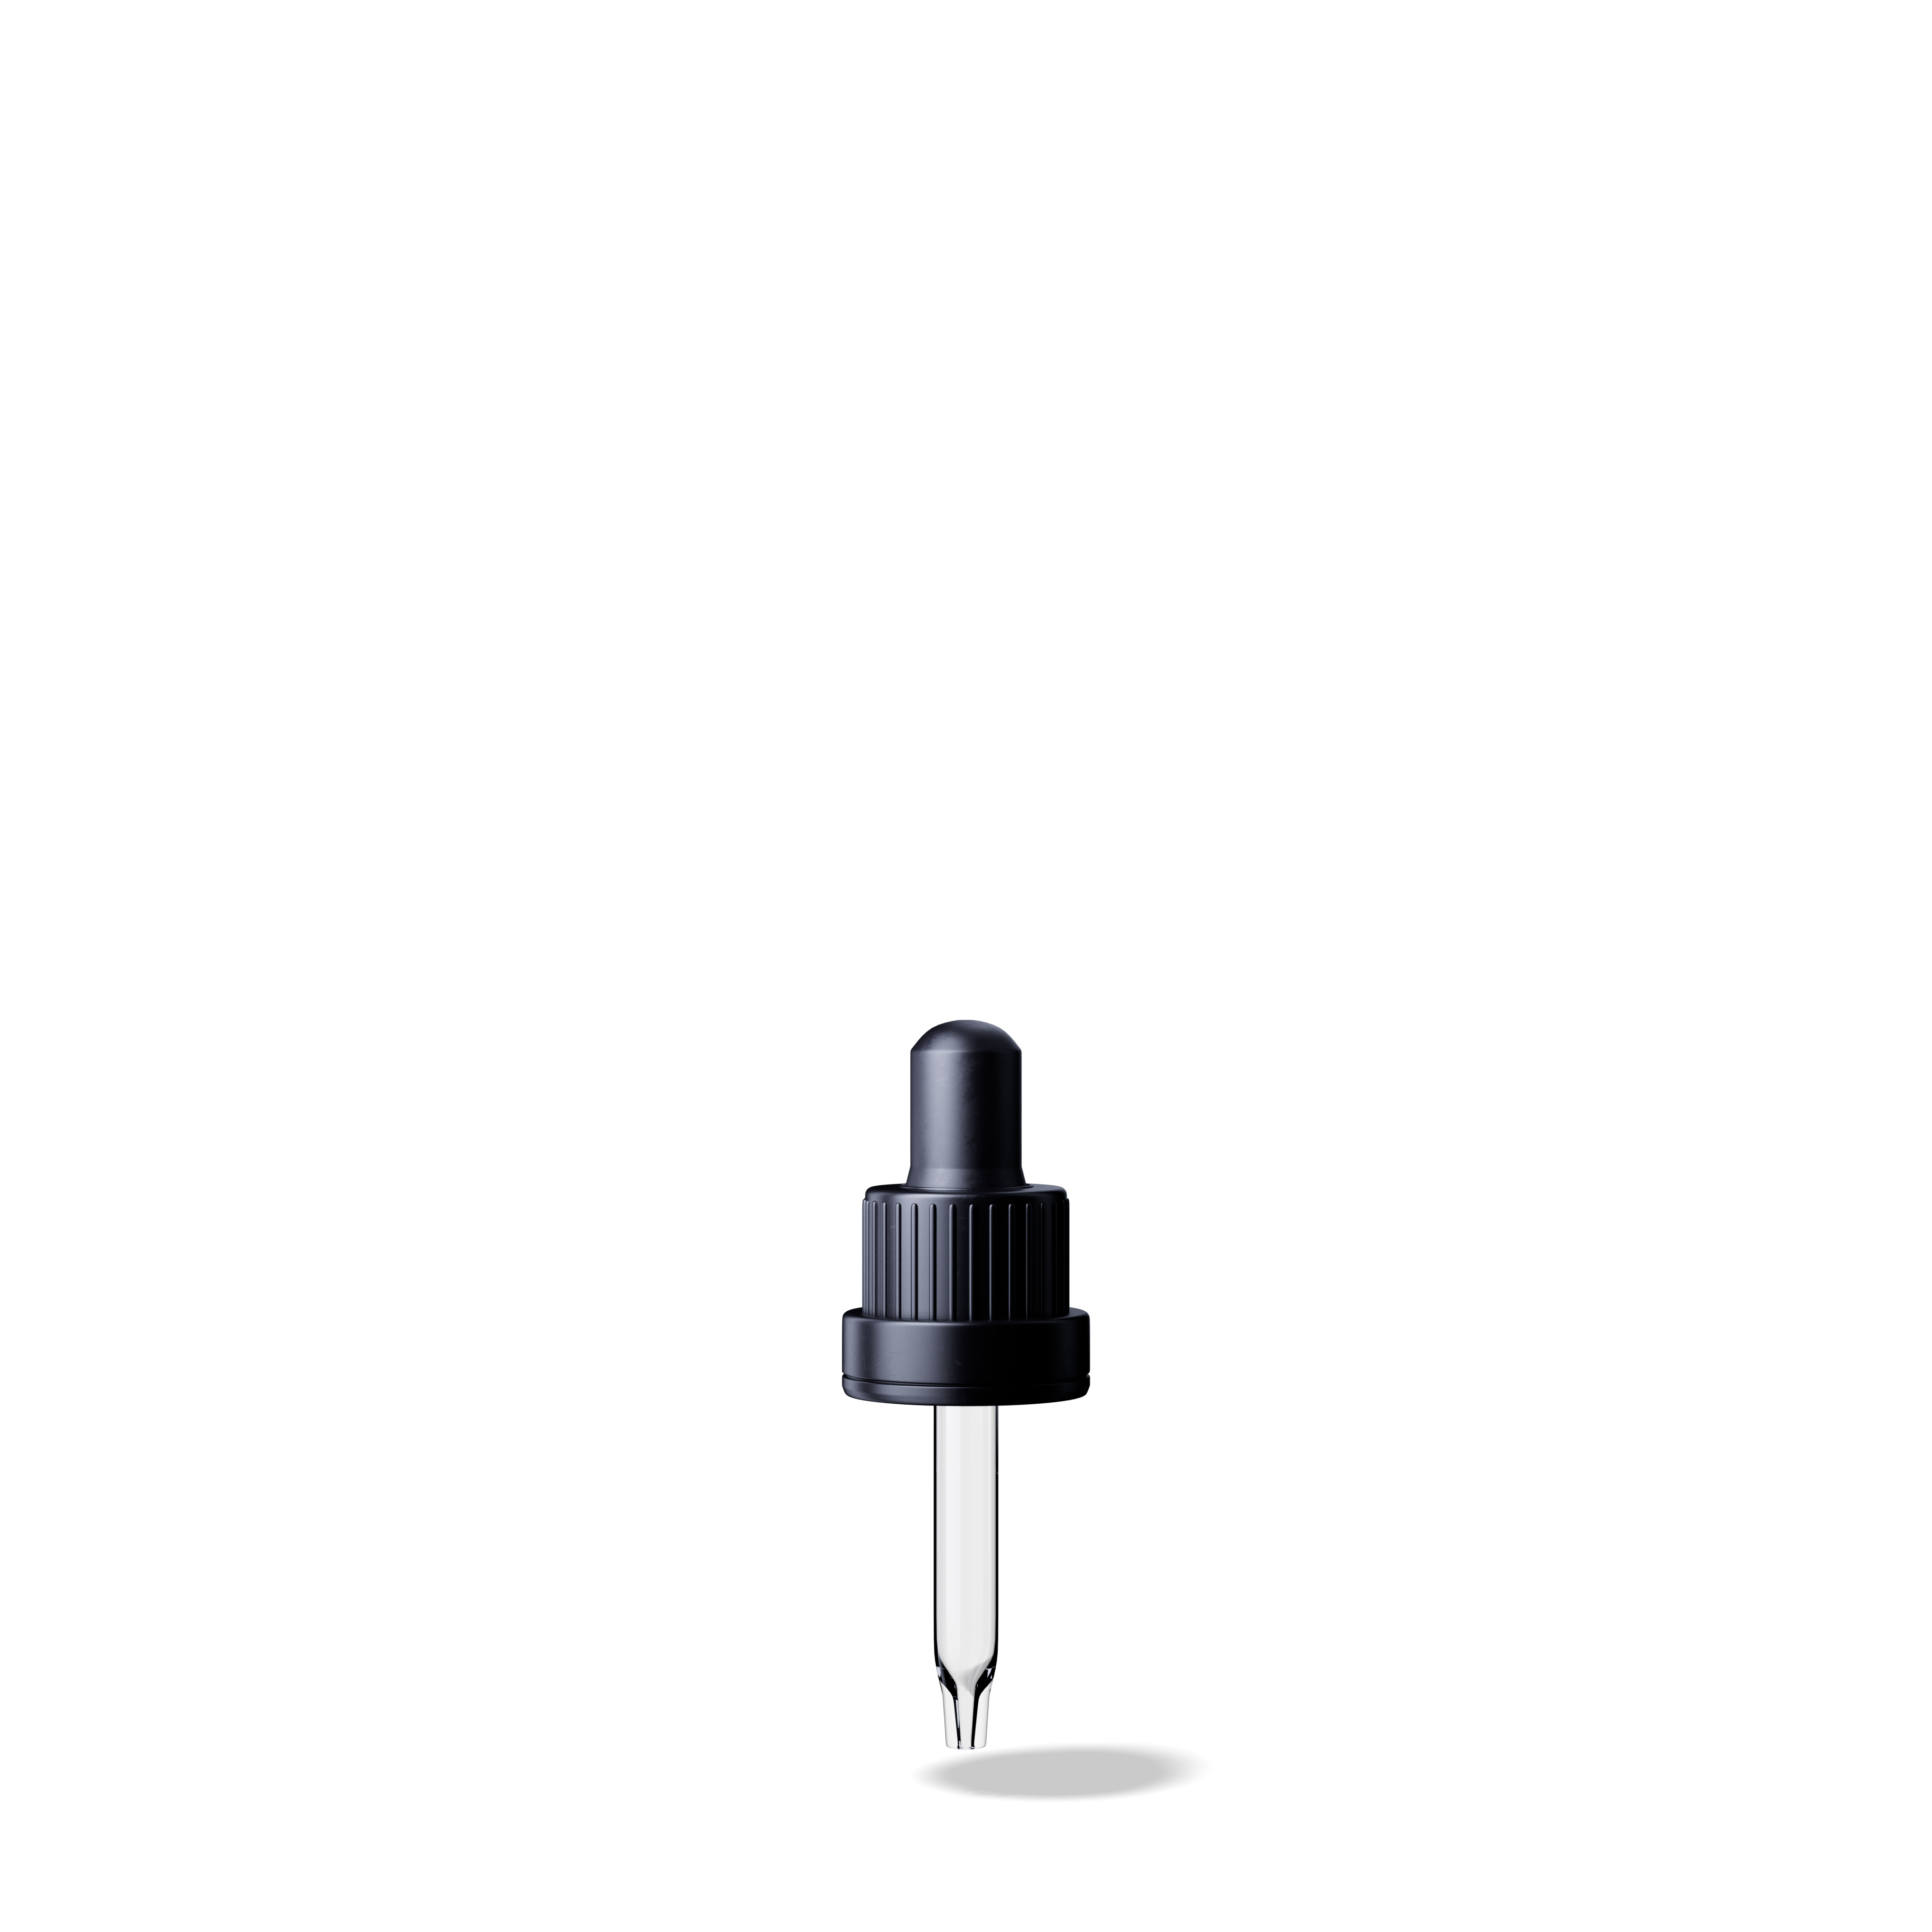 Pipette tamper evident DIN18, III, black, ribbed, bulb NBR, dose 0.7ml, conical tip (Orion 5)